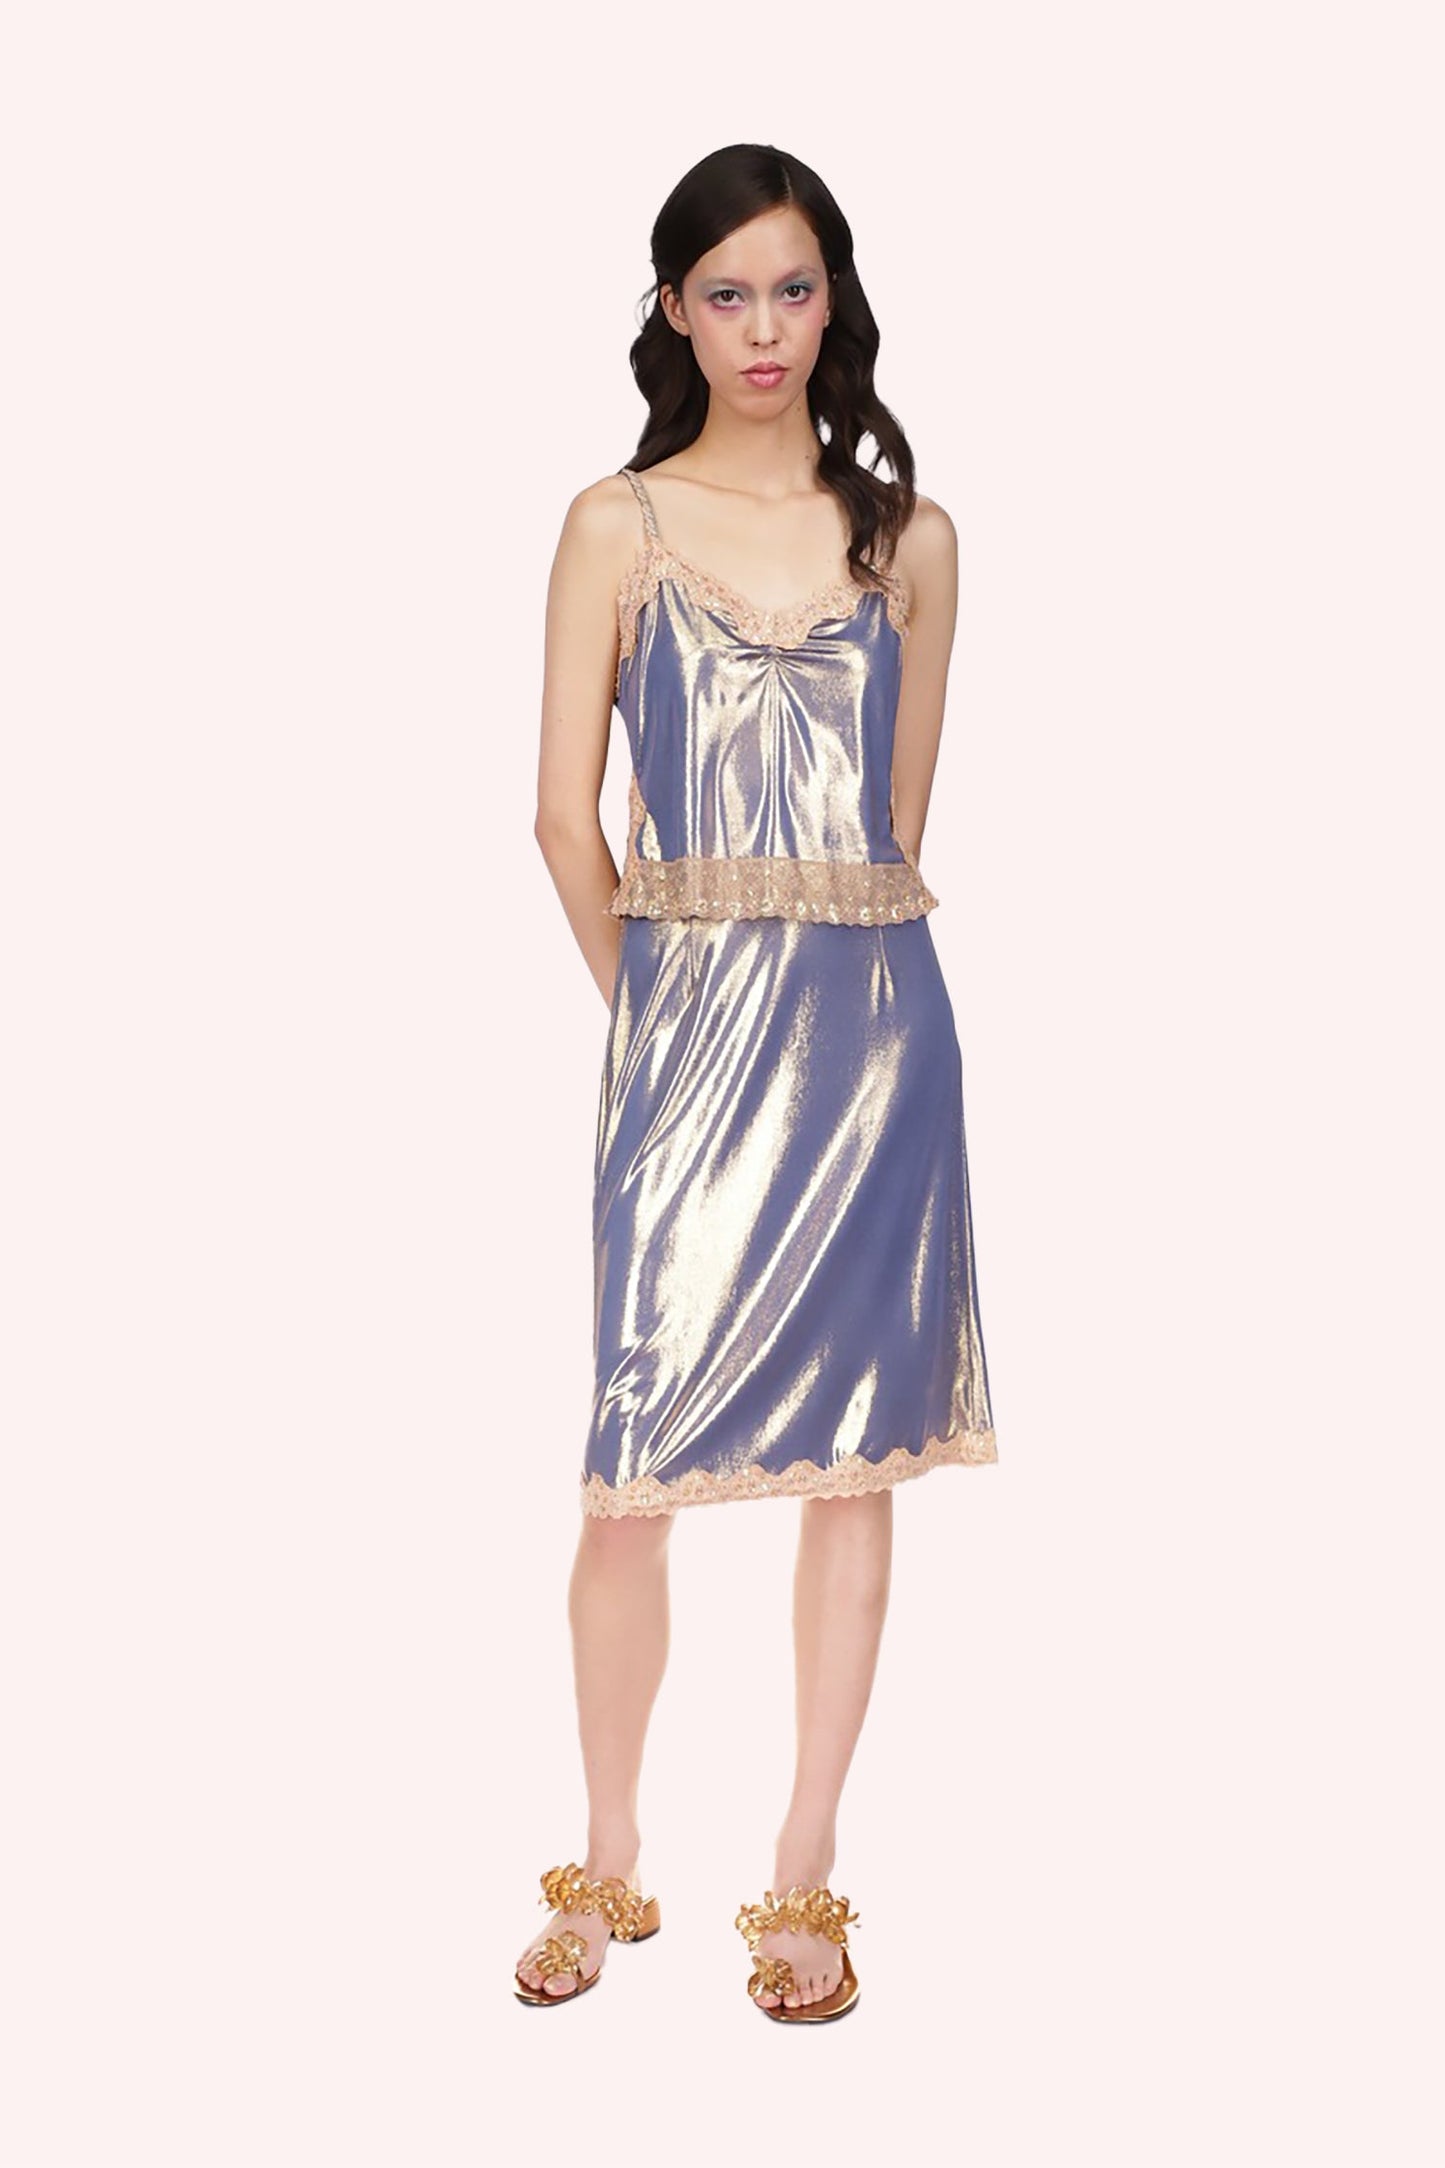 Cami Top Sapphire, shiny color, sleeveless, 2- straps over the shoulders, deep cut under arms